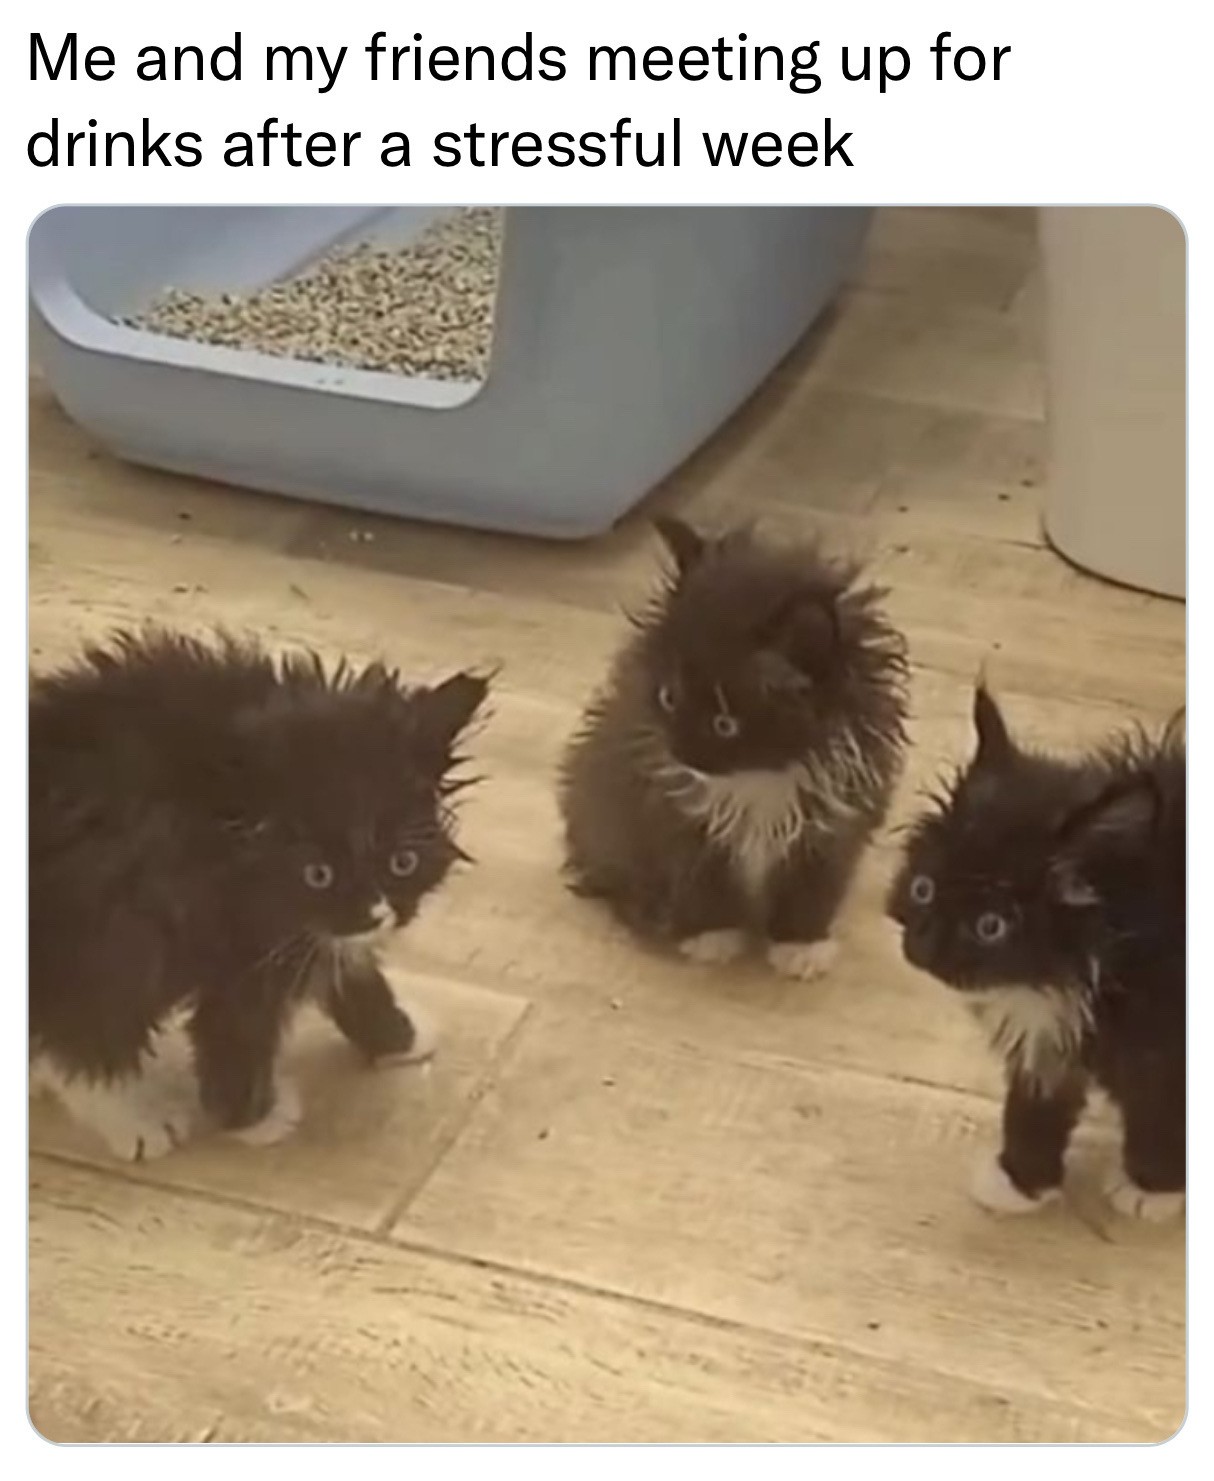 3 very frazzled-looking kittens.